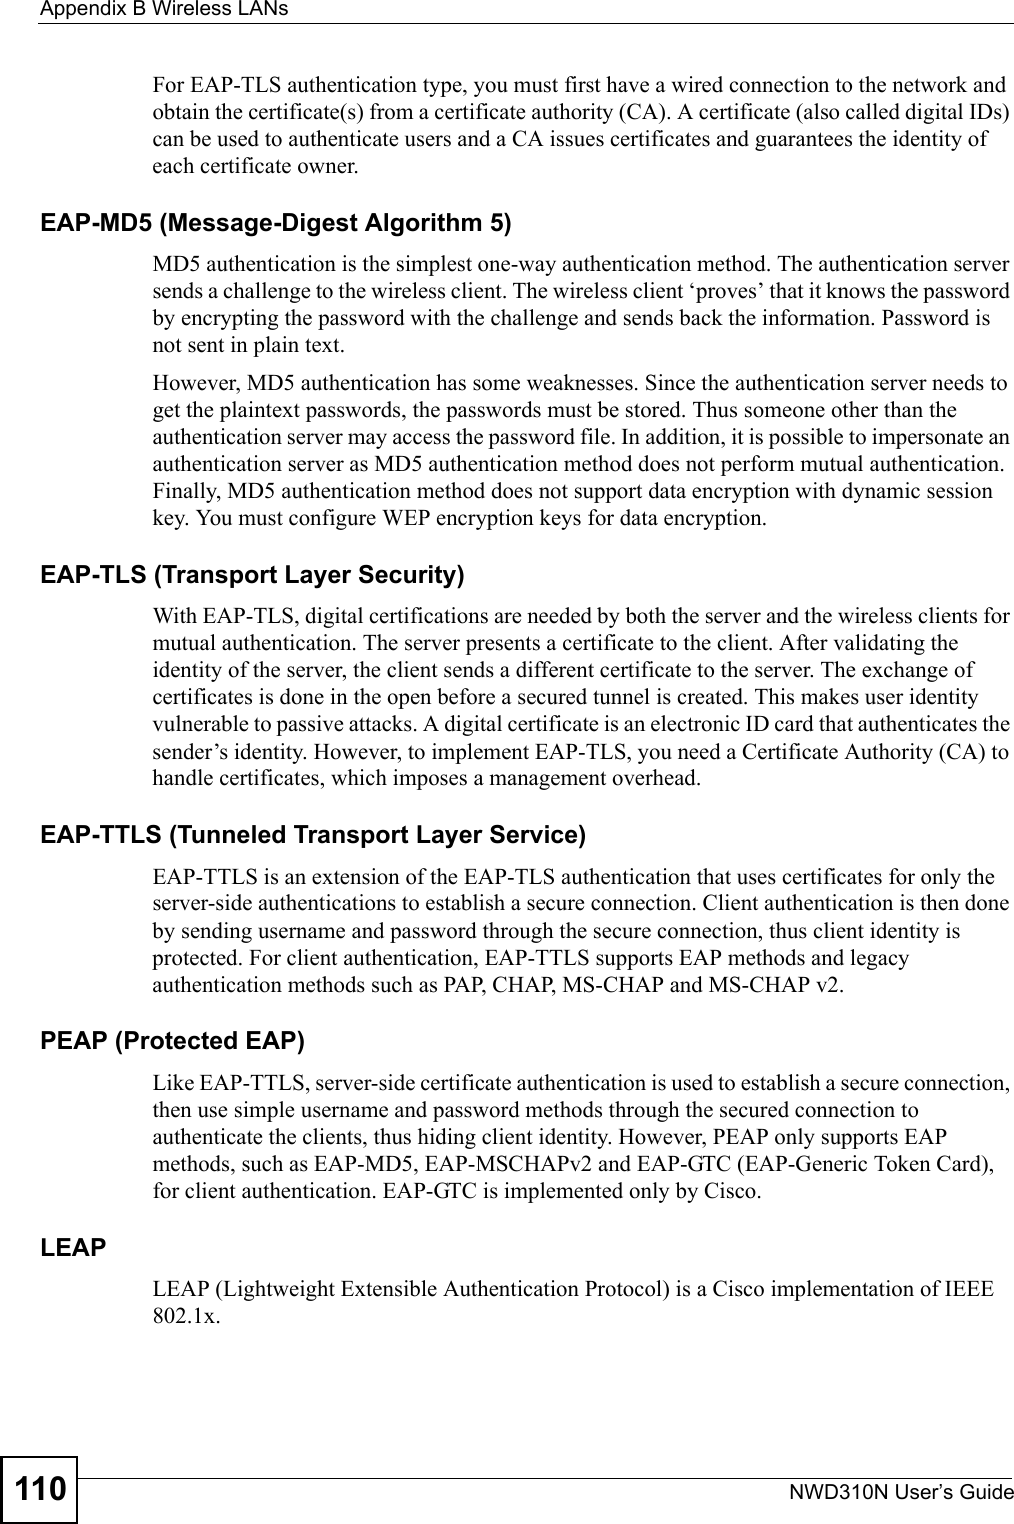 Appendix B Wireless LANsNWD310N User’s Guide110For EAP-TLS authentication type, you must first have a wired connection to the network and obtain the certificate(s) from a certificate authority (CA). A certificate (also called digital IDs) can be used to authenticate users and a CA issues certificates and guarantees the identity of each certificate owner.EAP-MD5 (Message-Digest Algorithm 5)MD5 authentication is the simplest one-way authentication method. The authentication server sends a challenge to the wireless client. The wireless client ‘proves’ that it knows the password by encrypting the password with the challenge and sends back the information. Password is not sent in plain text. However, MD5 authentication has some weaknesses. Since the authentication server needs to get the plaintext passwords, the passwords must be stored. Thus someone other than the authentication server may access the password file. In addition, it is possible to impersonate an authentication server as MD5 authentication method does not perform mutual authentication. Finally, MD5 authentication method does not support data encryption with dynamic session key. You must configure WEP encryption keys for data encryption. EAP-TLS (Transport Layer Security)With EAP-TLS, digital certifications are needed by both the server and the wireless clients for mutual authentication. The server presents a certificate to the client. After validating the identity of the server, the client sends a different certificate to the server. The exchange of certificates is done in the open before a secured tunnel is created. This makes user identity vulnerable to passive attacks. A digital certificate is an electronic ID card that authenticates the sender’s identity. However, to implement EAP-TLS, you need a Certificate Authority (CA) to handle certificates, which imposes a management overhead. EAP-TTLS (Tunneled Transport Layer Service) EAP-TTLS is an extension of the EAP-TLS authentication that uses certificates for only the server-side authentications to establish a secure connection. Client authentication is then done by sending username and password through the secure connection, thus client identity is protected. For client authentication, EAP-TTLS supports EAP methods and legacy authentication methods such as PAP, CHAP, MS-CHAP and MS-CHAP v2. PEAP (Protected EAP)   Like EAP-TTLS, server-side certificate authentication is used to establish a secure connection, then use simple username and password methods through the secured connection to authenticate the clients, thus hiding client identity. However, PEAP only supports EAP methods, such as EAP-MD5, EAP-MSCHAPv2 and EAP-GTC (EAP-Generic Token Card), for client authentication. EAP-GTC is implemented only by Cisco.LEAPLEAP (Lightweight Extensible Authentication Protocol) is a Cisco implementation of IEEE 802.1x. 